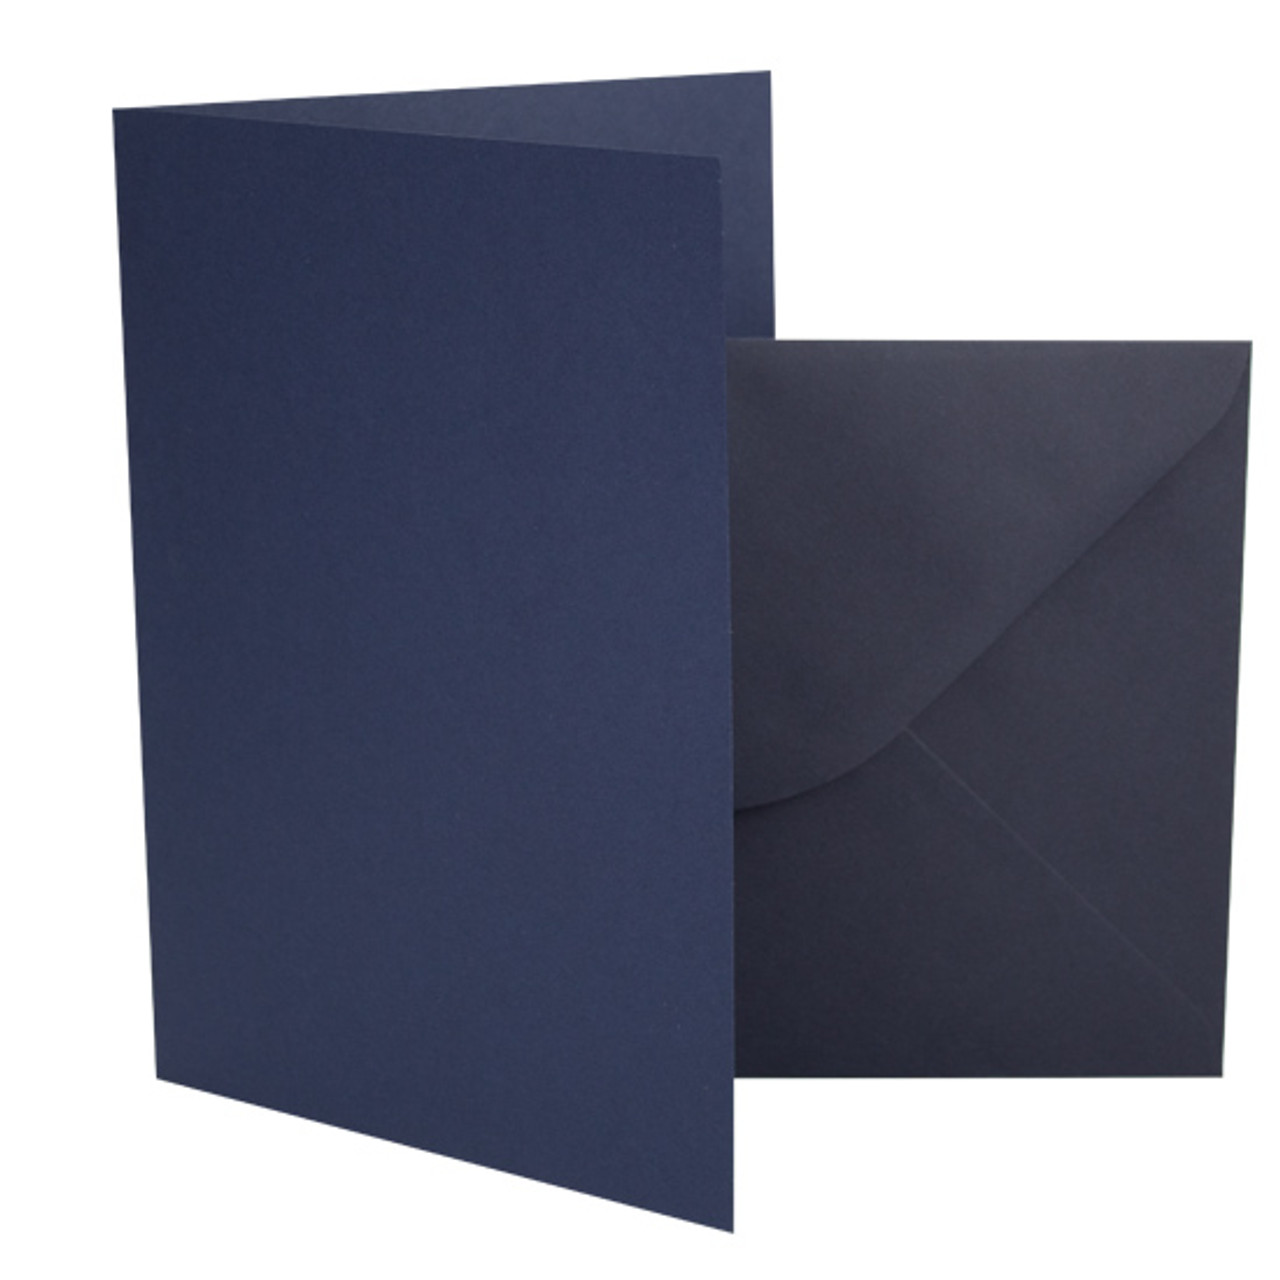 Mini Note Cards Mini Cards Small Cards Ivory/navy Blue Tri-fold